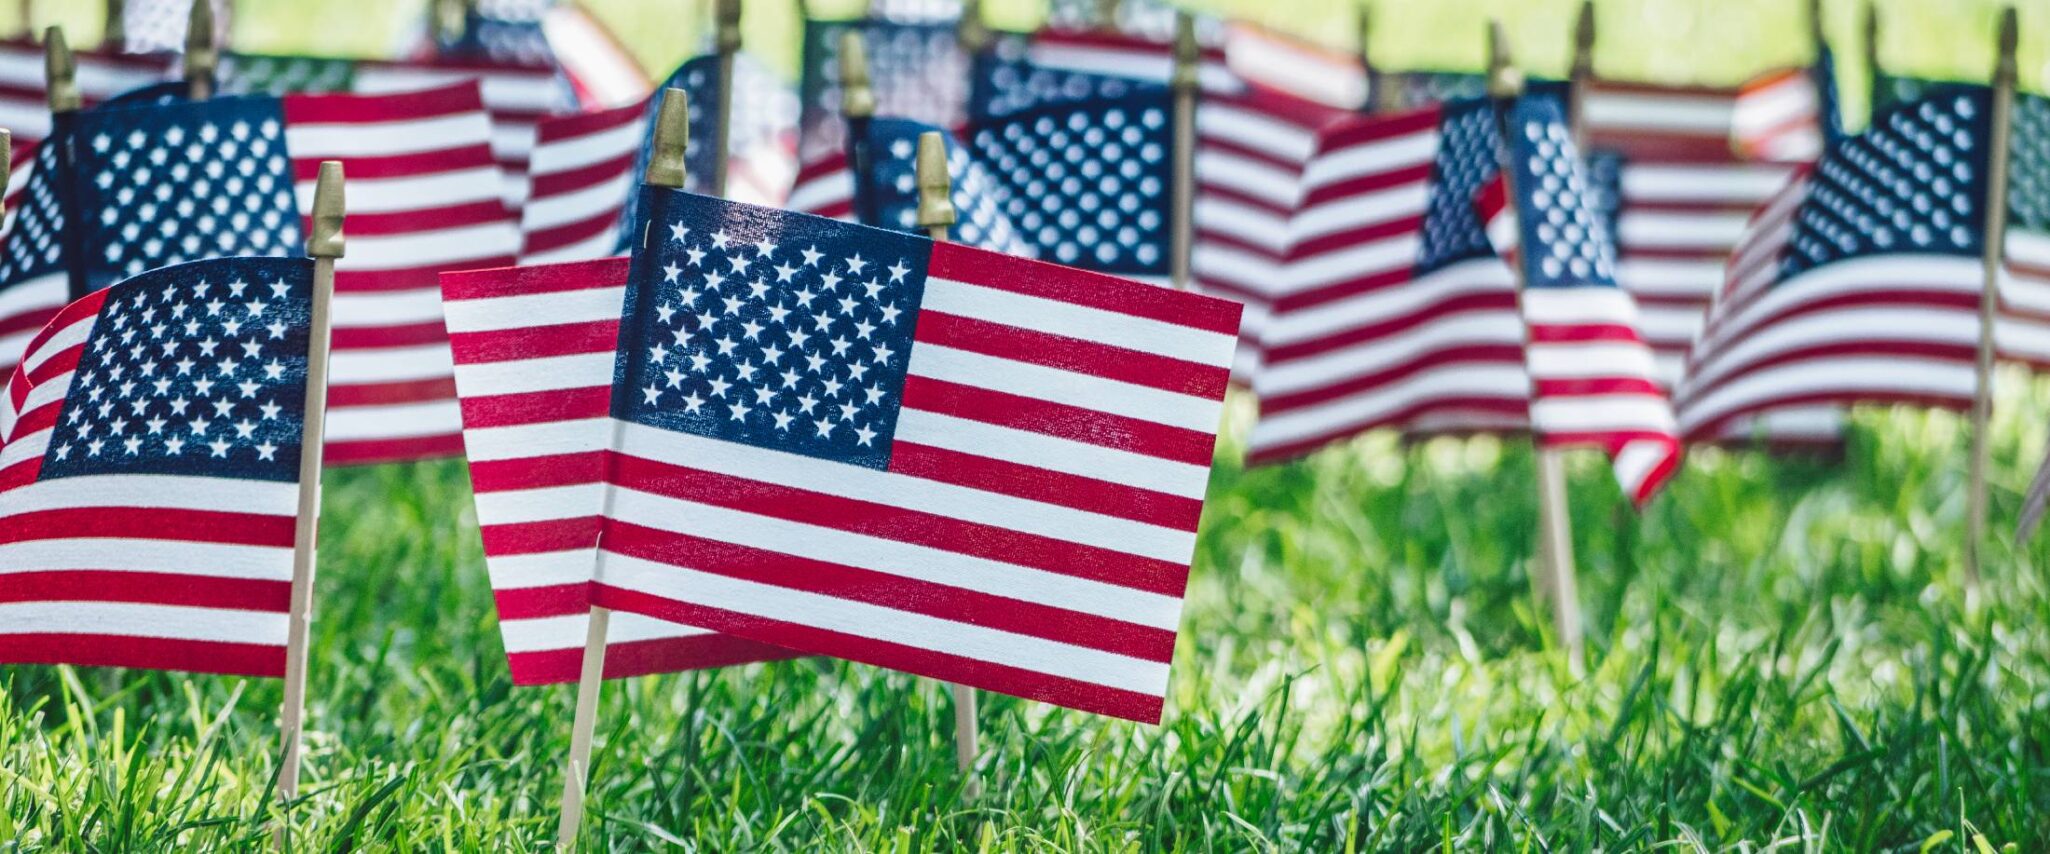 small American flags standing in the grass to honor memorial day